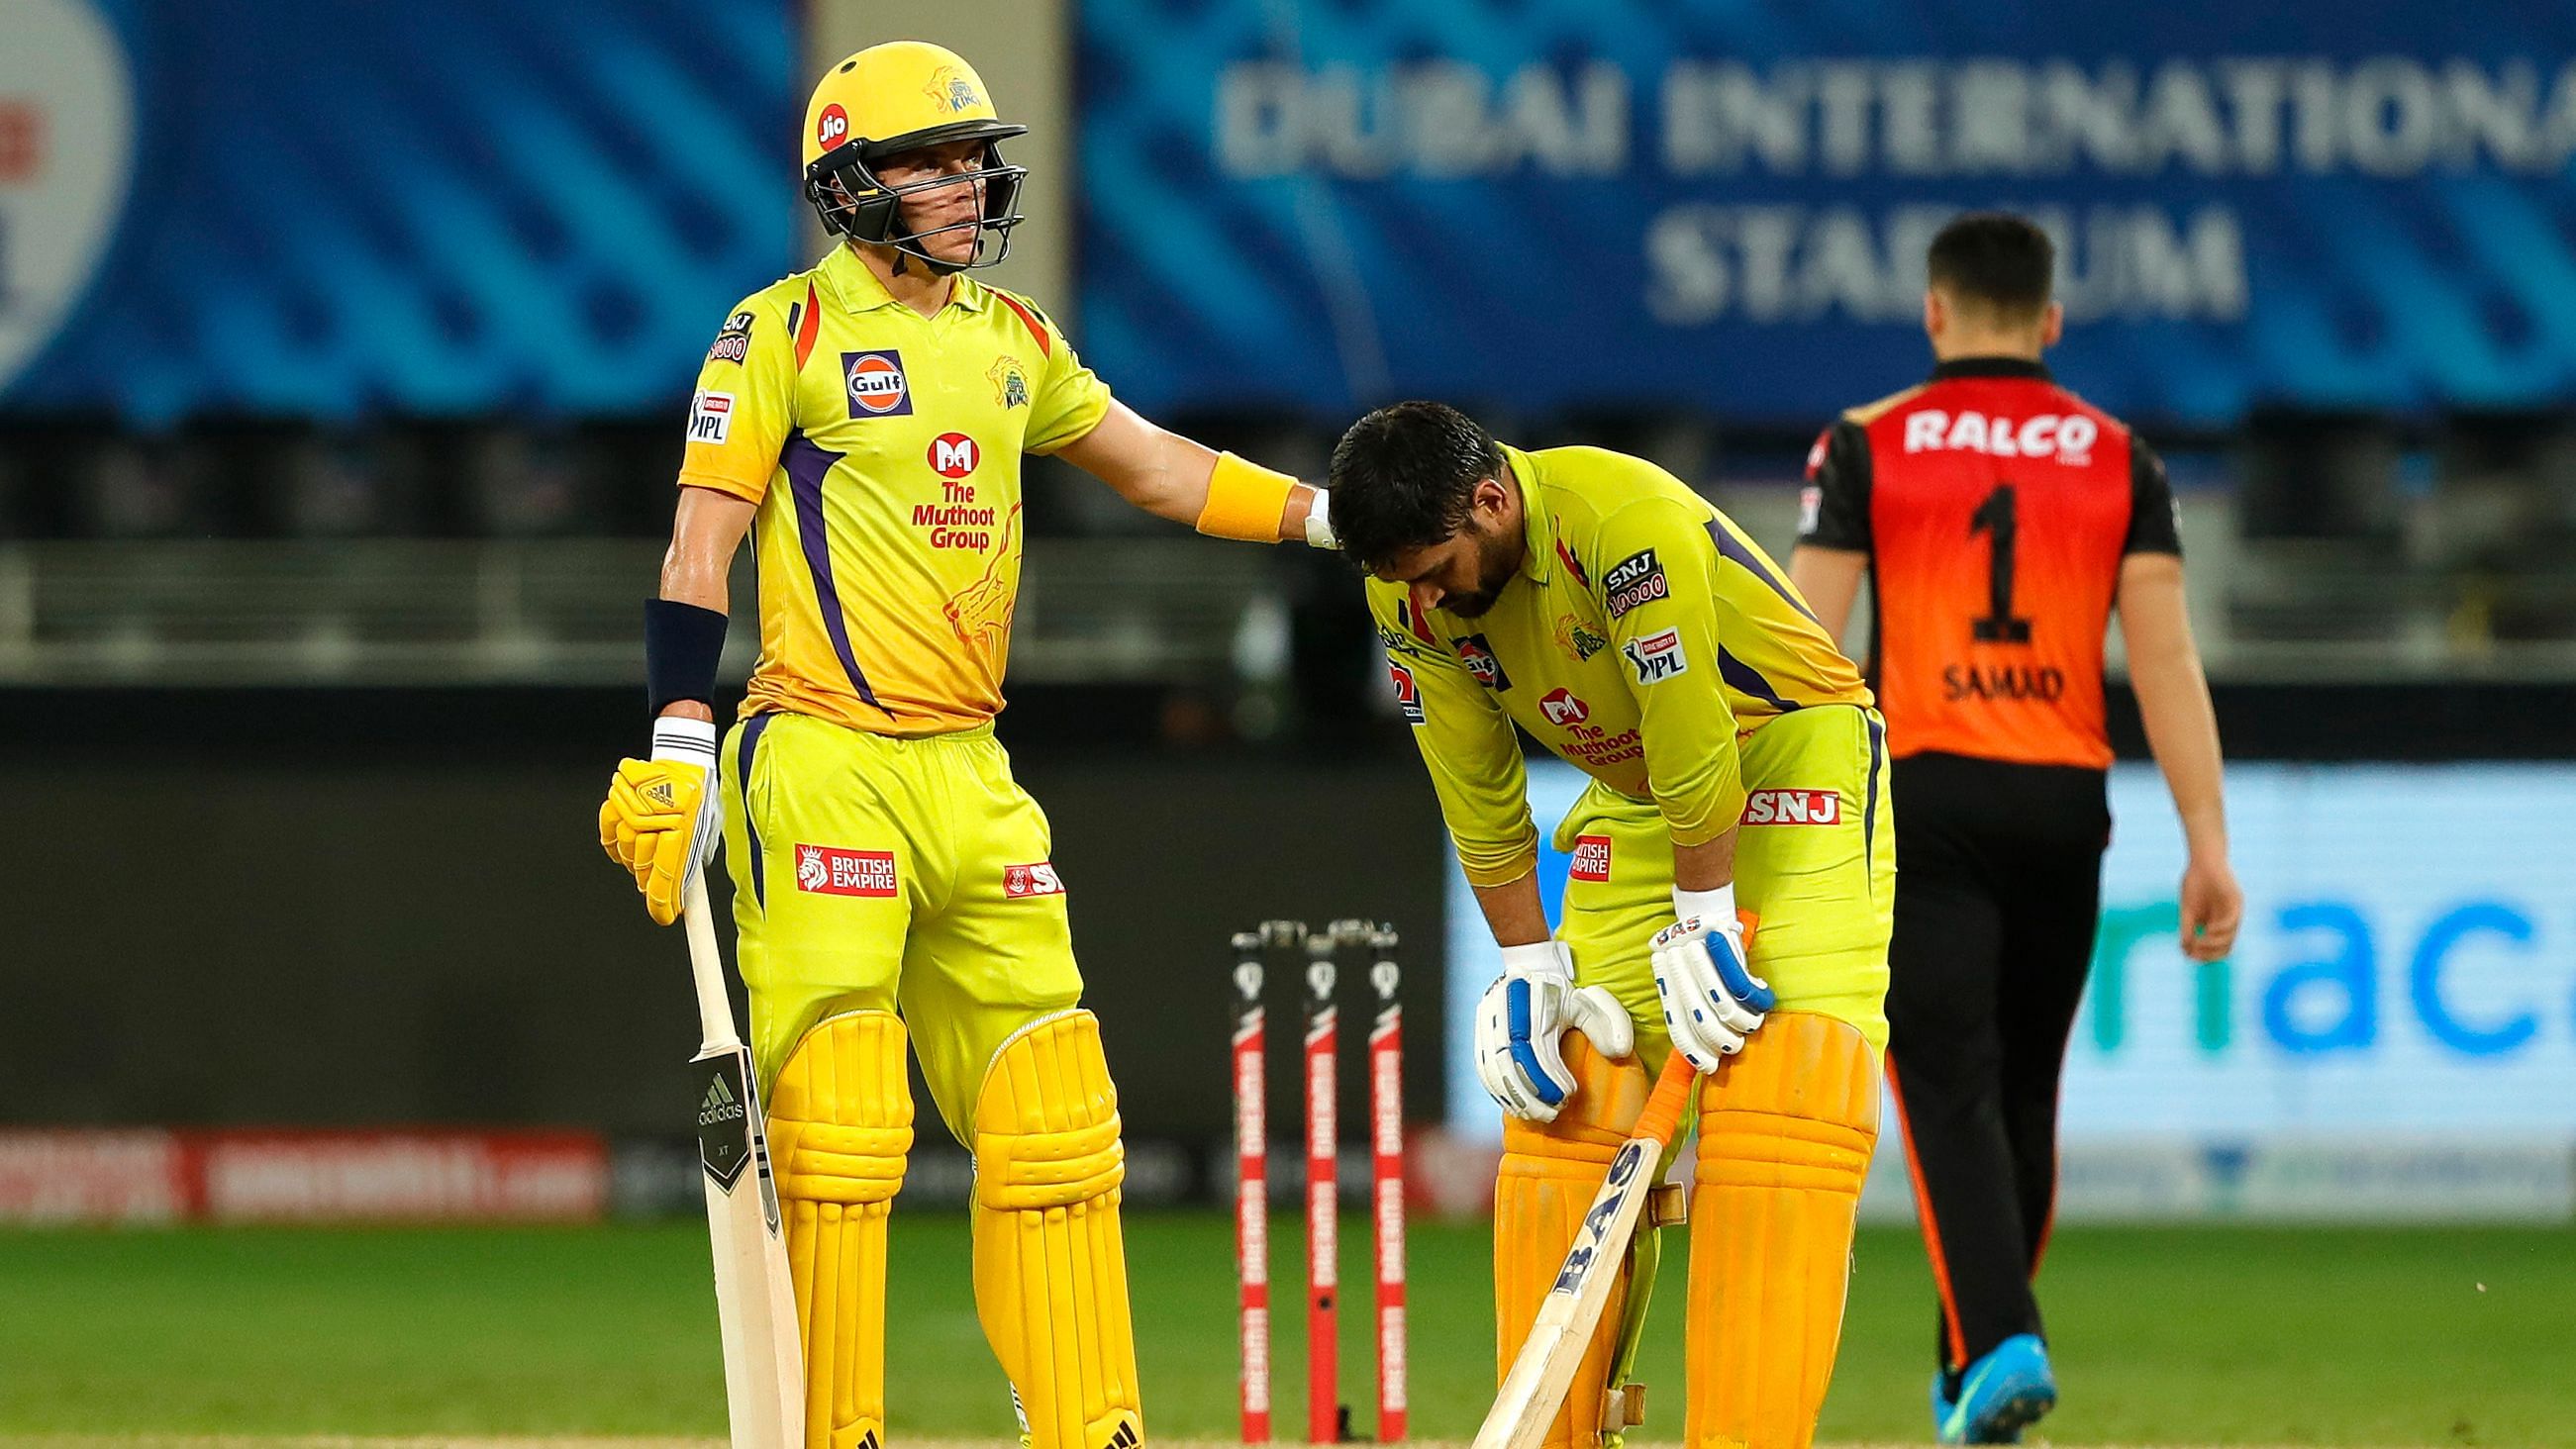 Diehard MSD fans cry react to Dhoni struggles in CSK match 